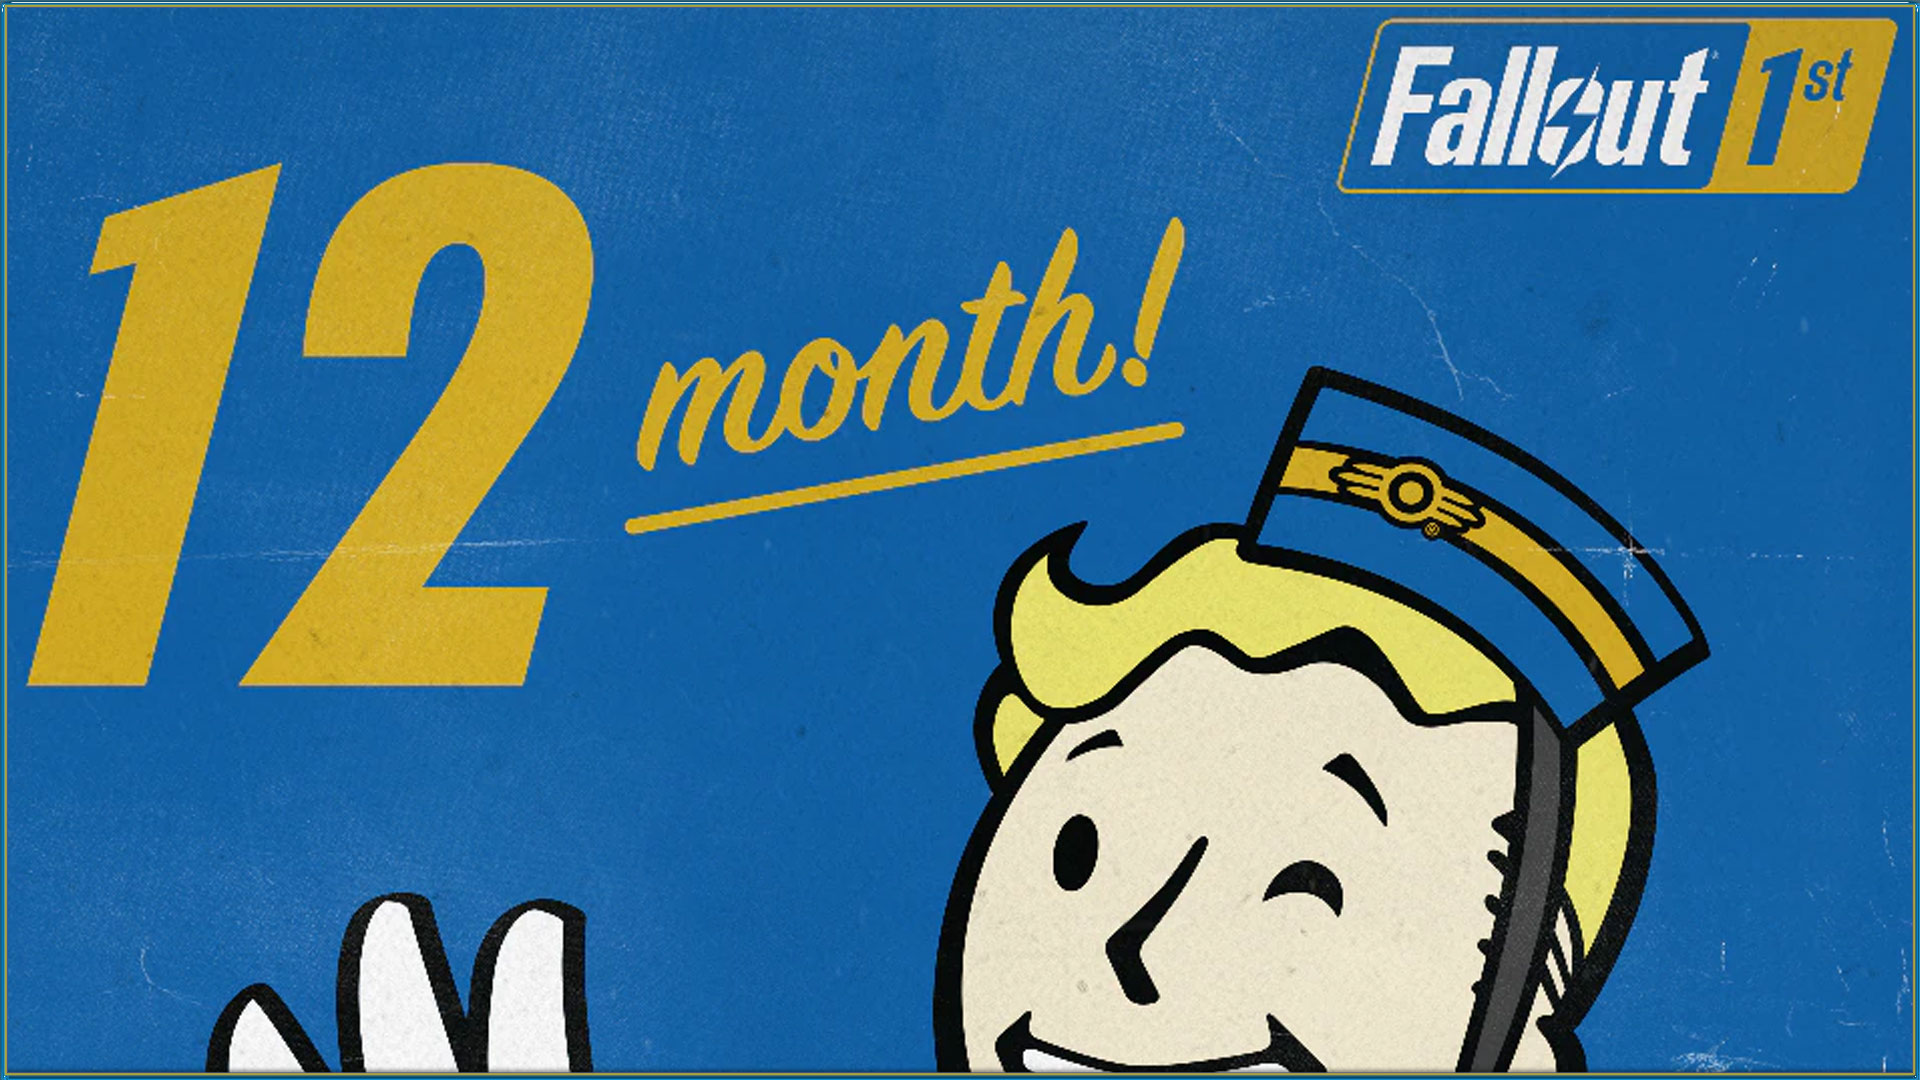 Fallout 1st steam 1 month membership фото 1